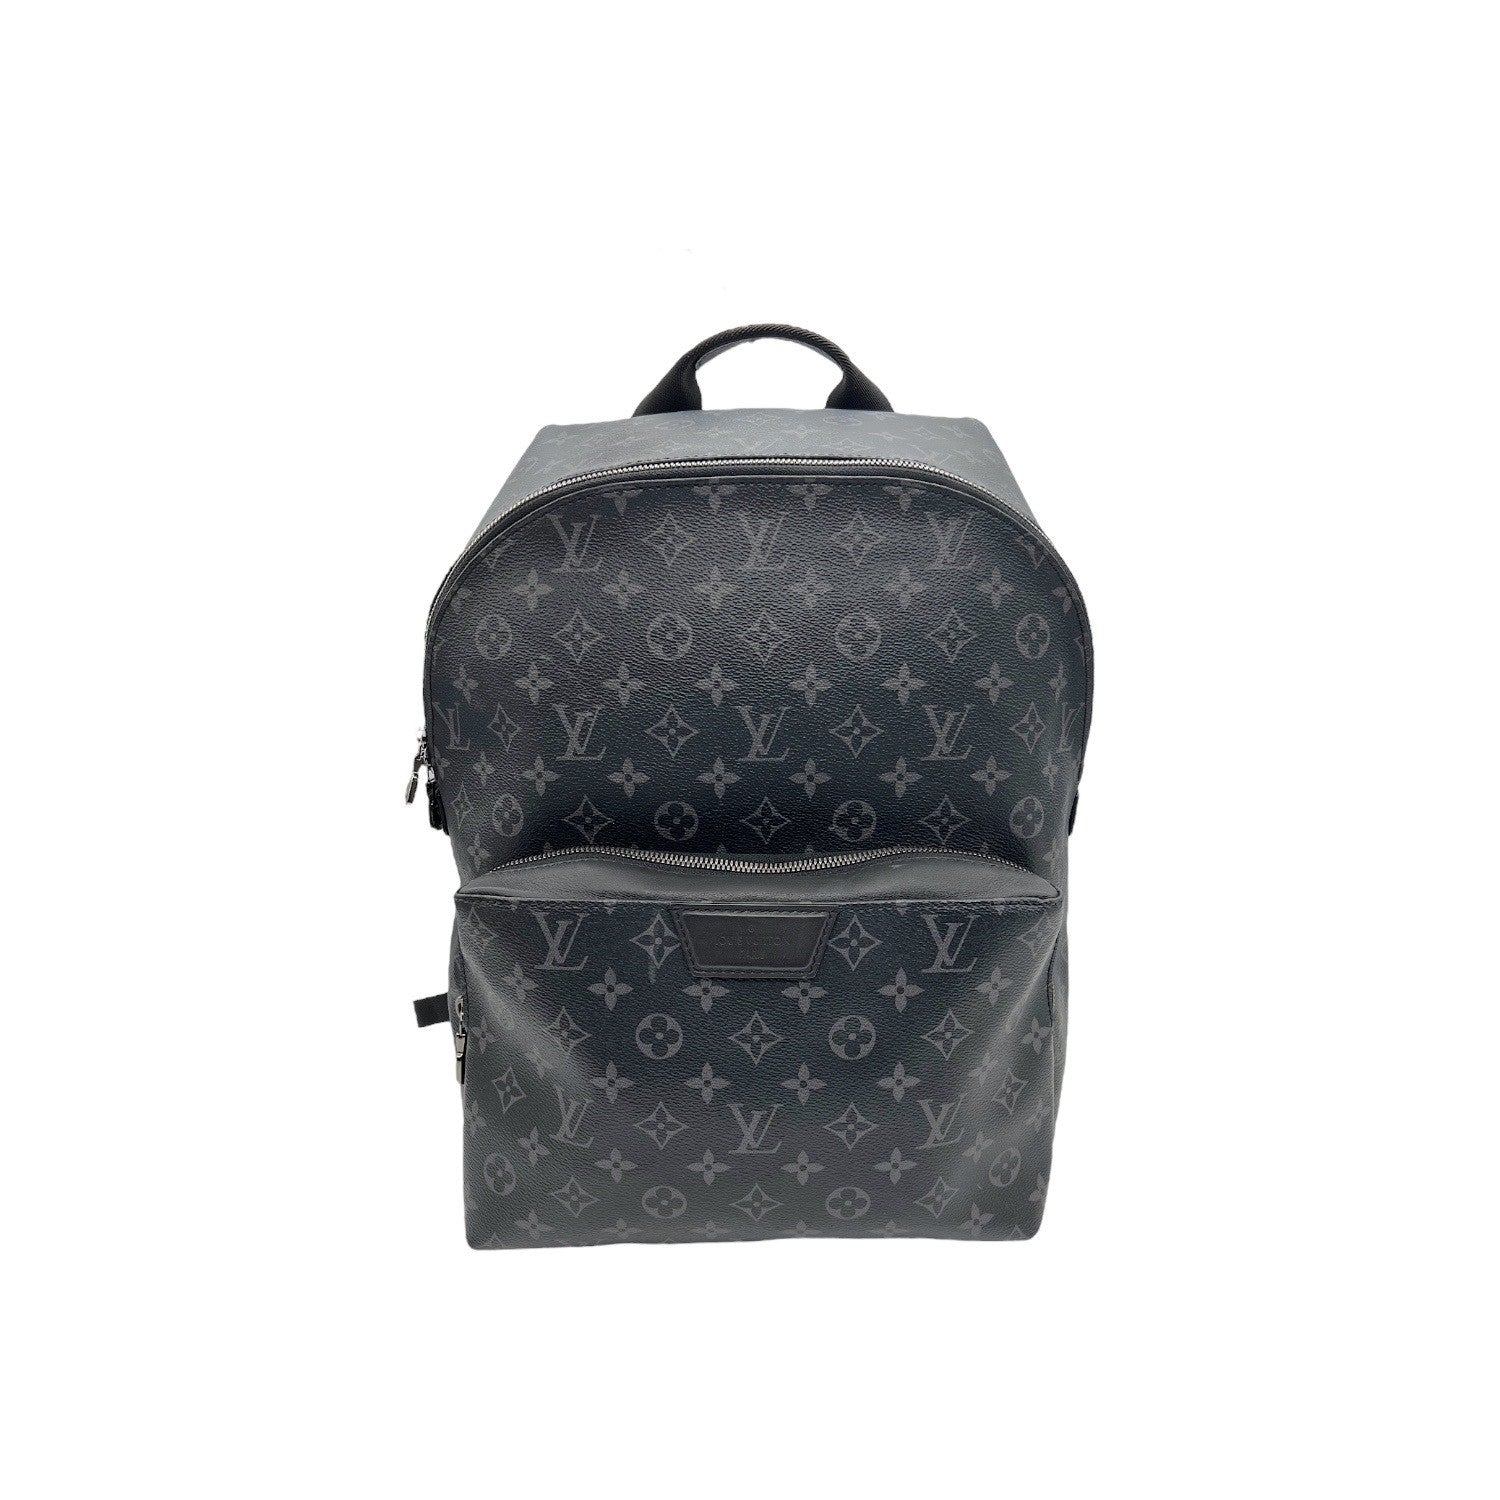 Louis Vuitton - Discovery mm Backpack - Monogram Canvas - Eclipse - Men - Luxury